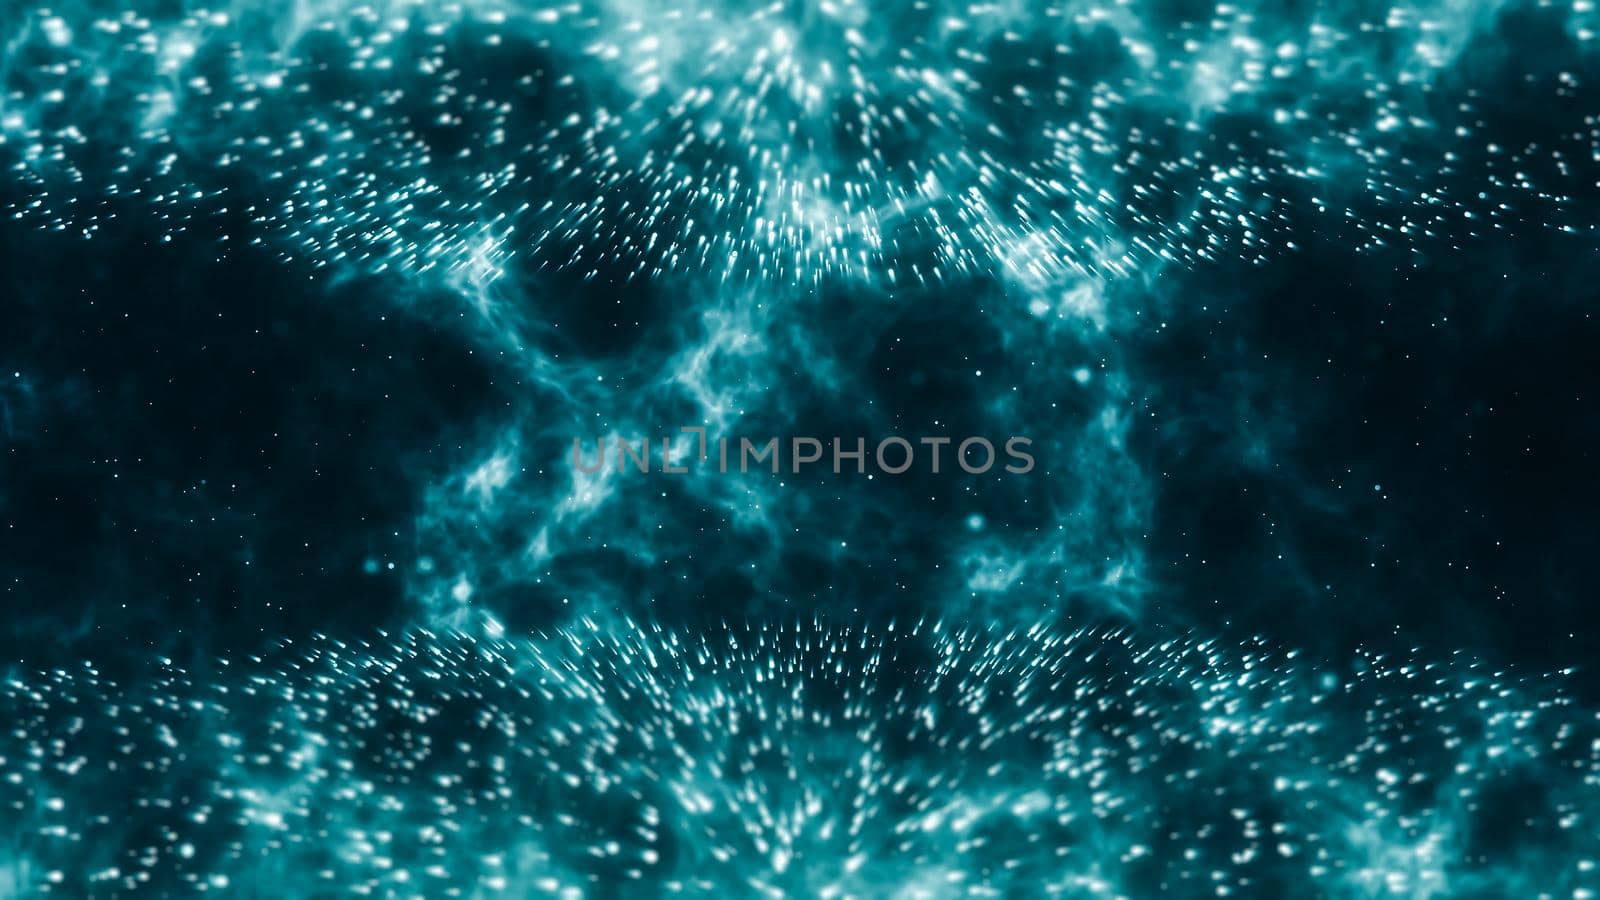 dramatic backdrop of particle formation with rays of light blue energy in the background
 by vikiriki